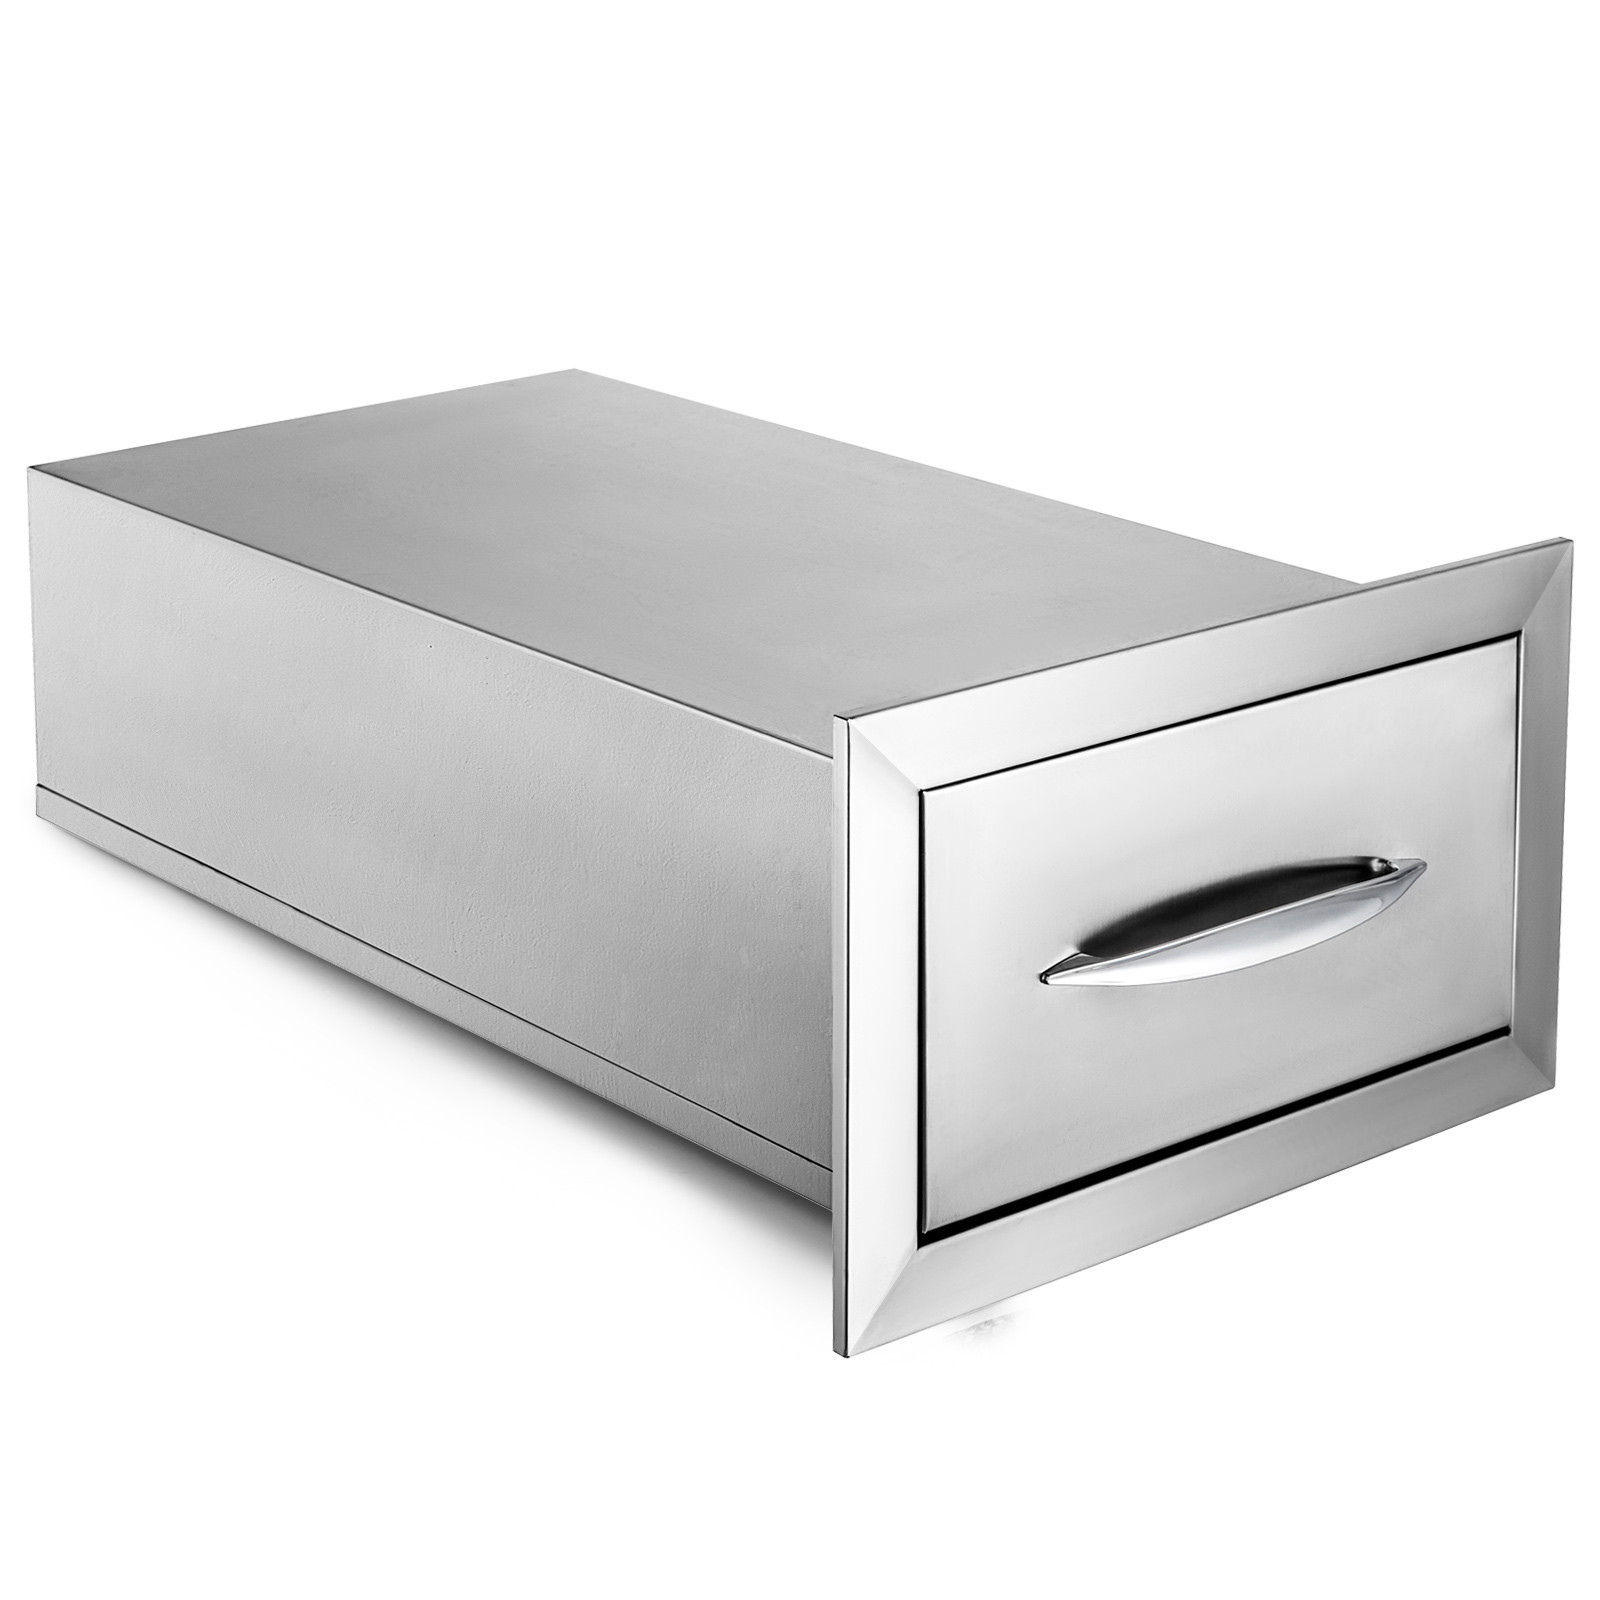 Outdoor Kitchen Doors And Drawers
 OUTDOOR KITCHEN BBQ ISLAND PONENTS STAINLESS STEEL